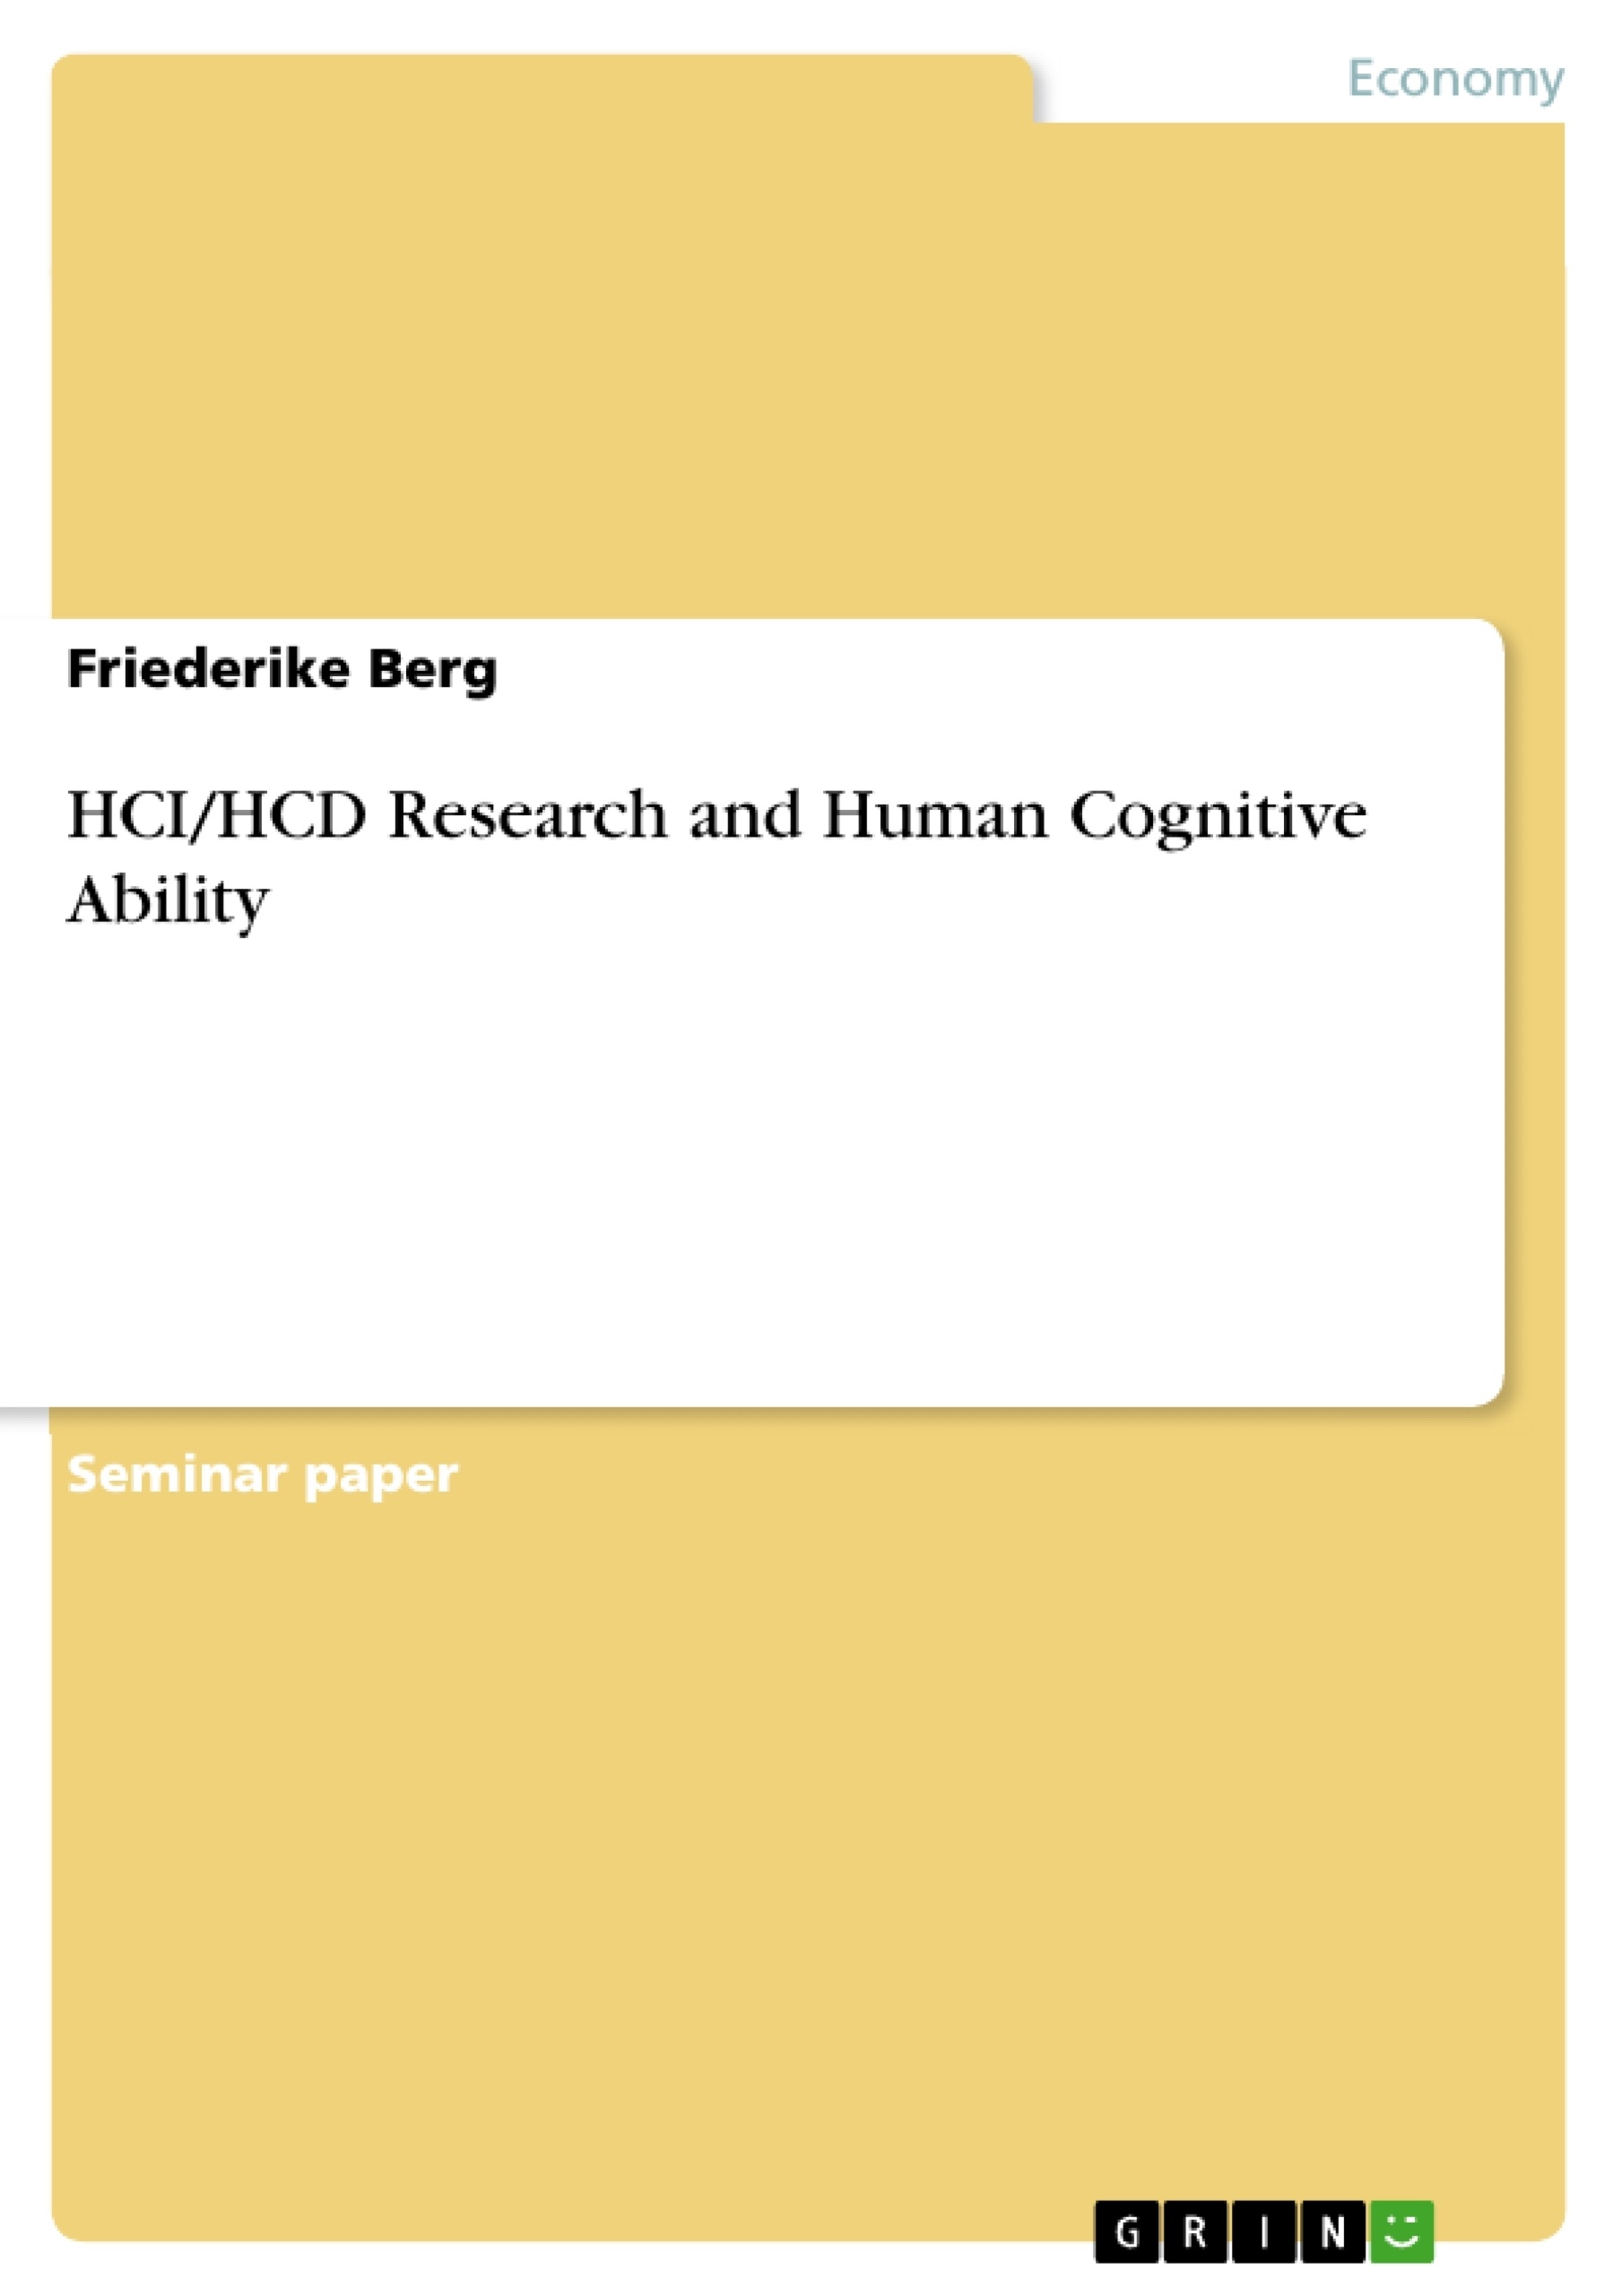 Title: HCI/HCD Research and Human Cognitive Ability